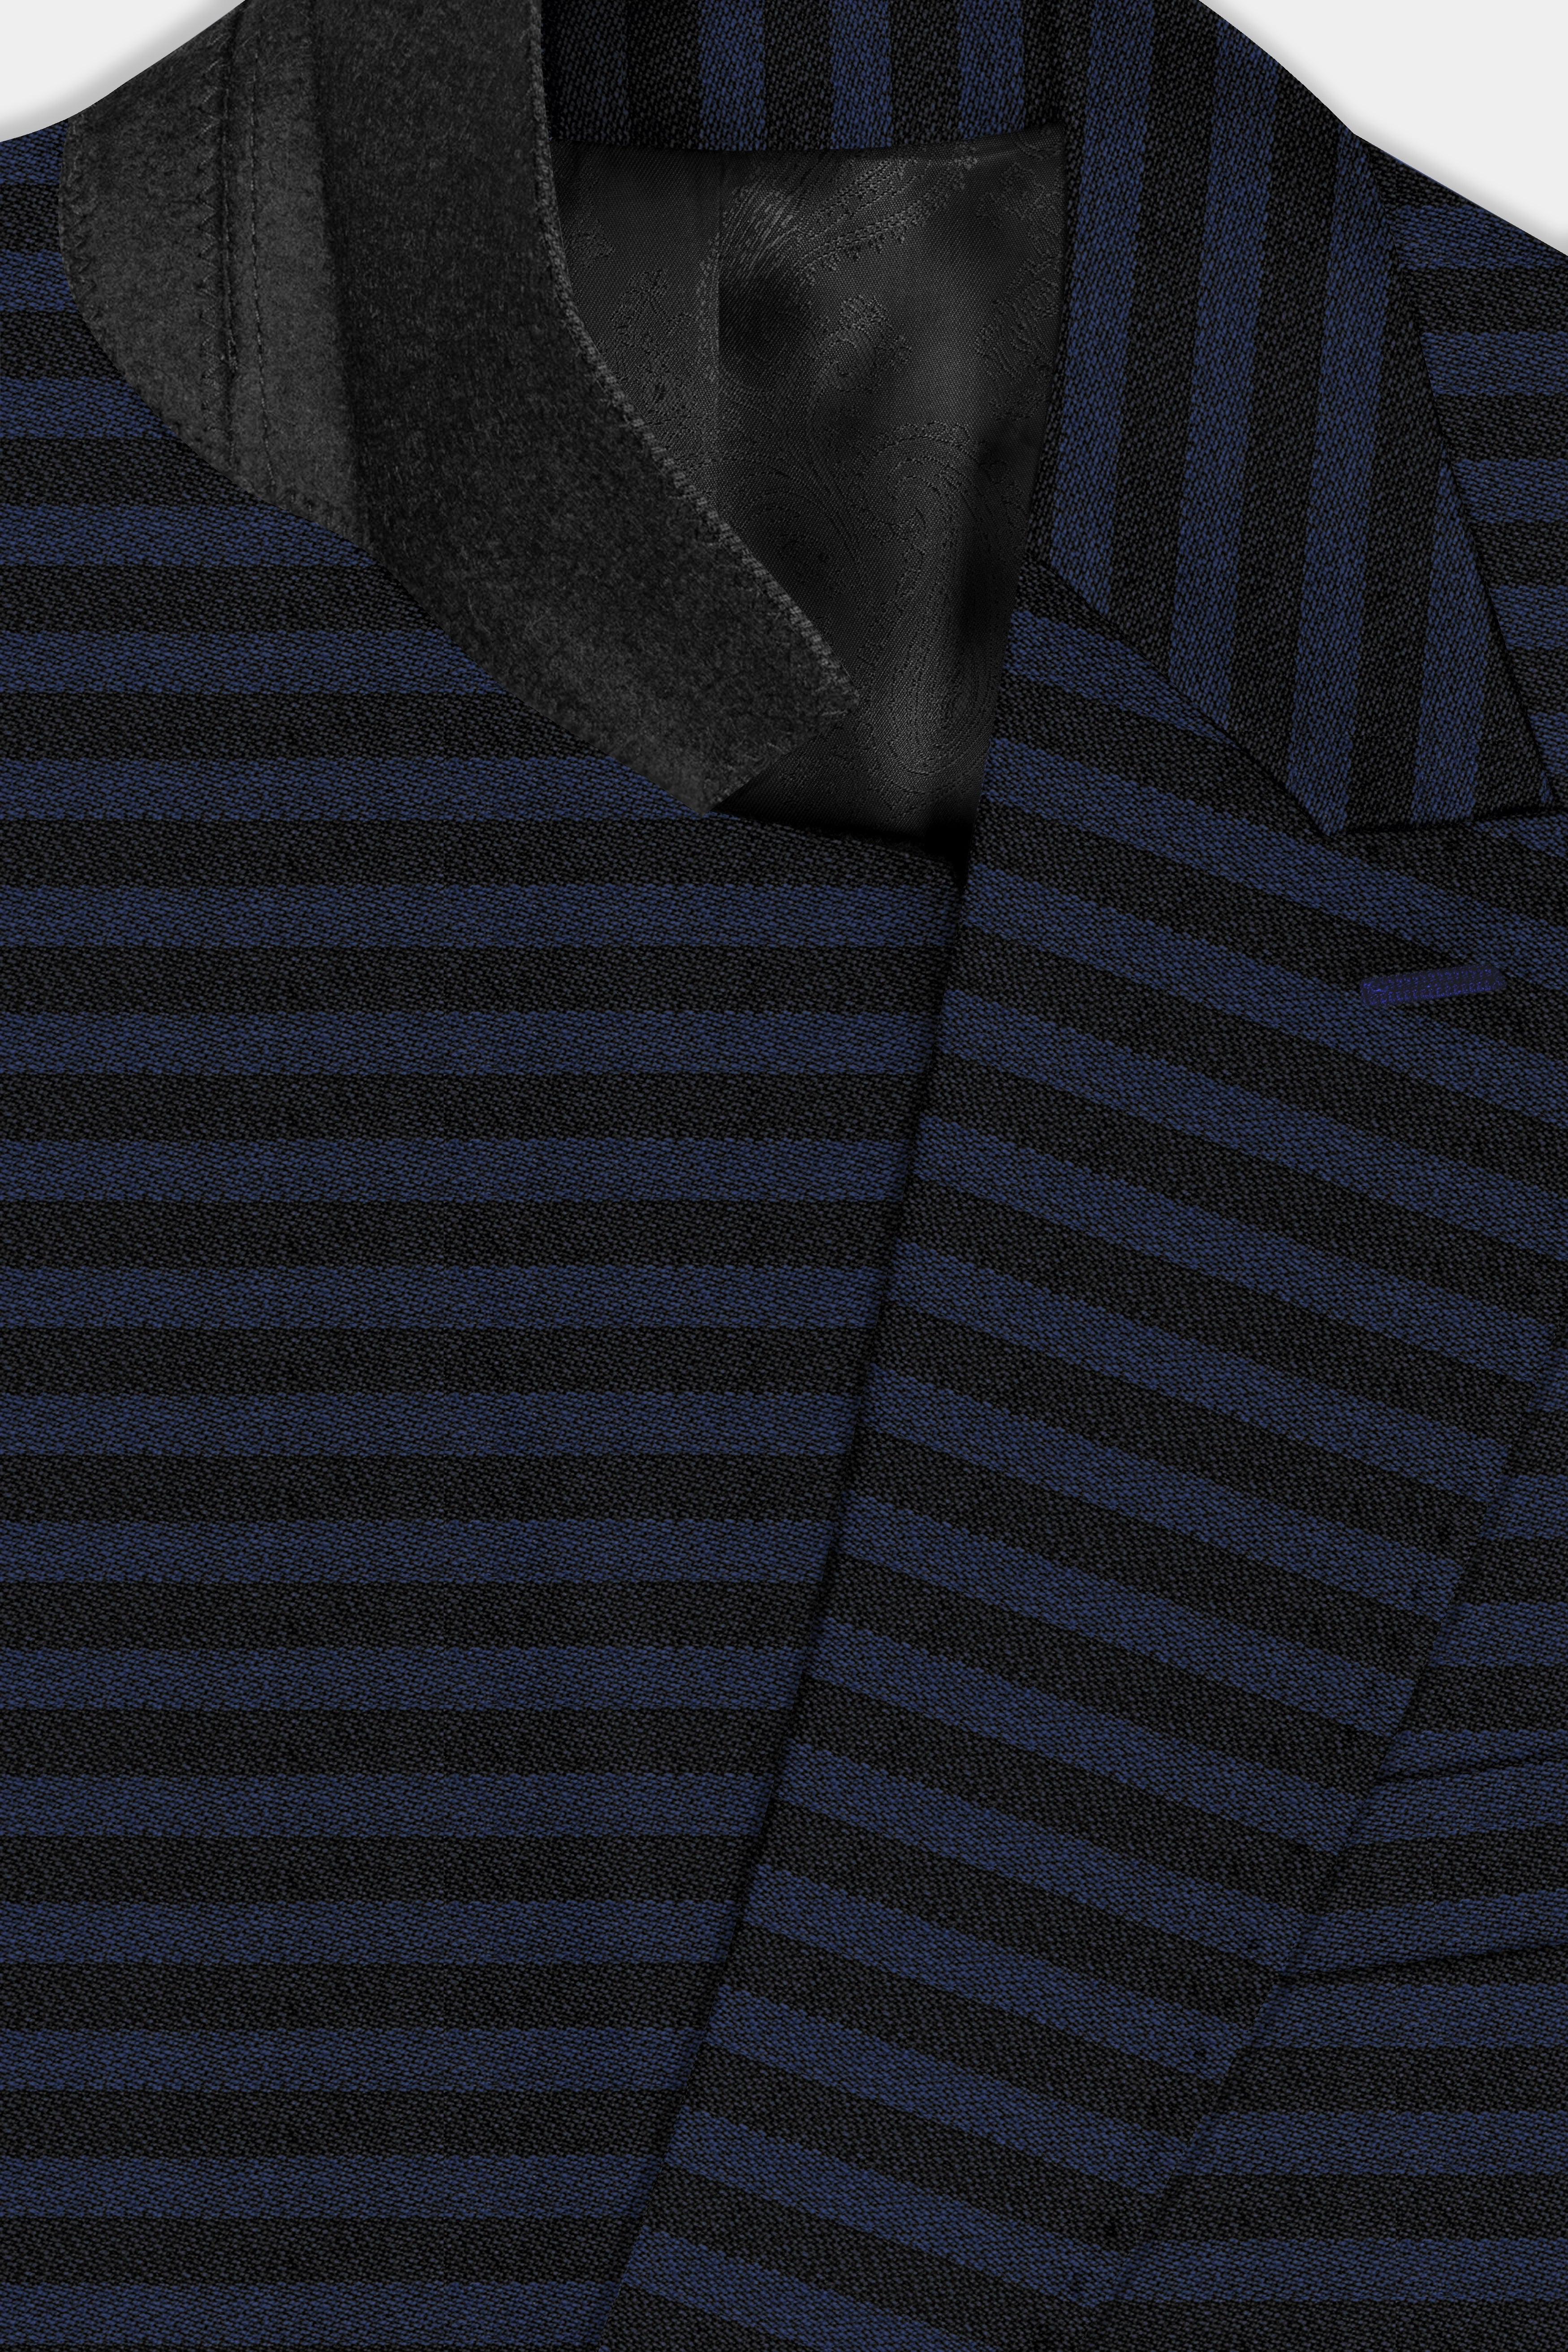 Mirage Blue and Black Horizontal Striped Wool Blend Suit